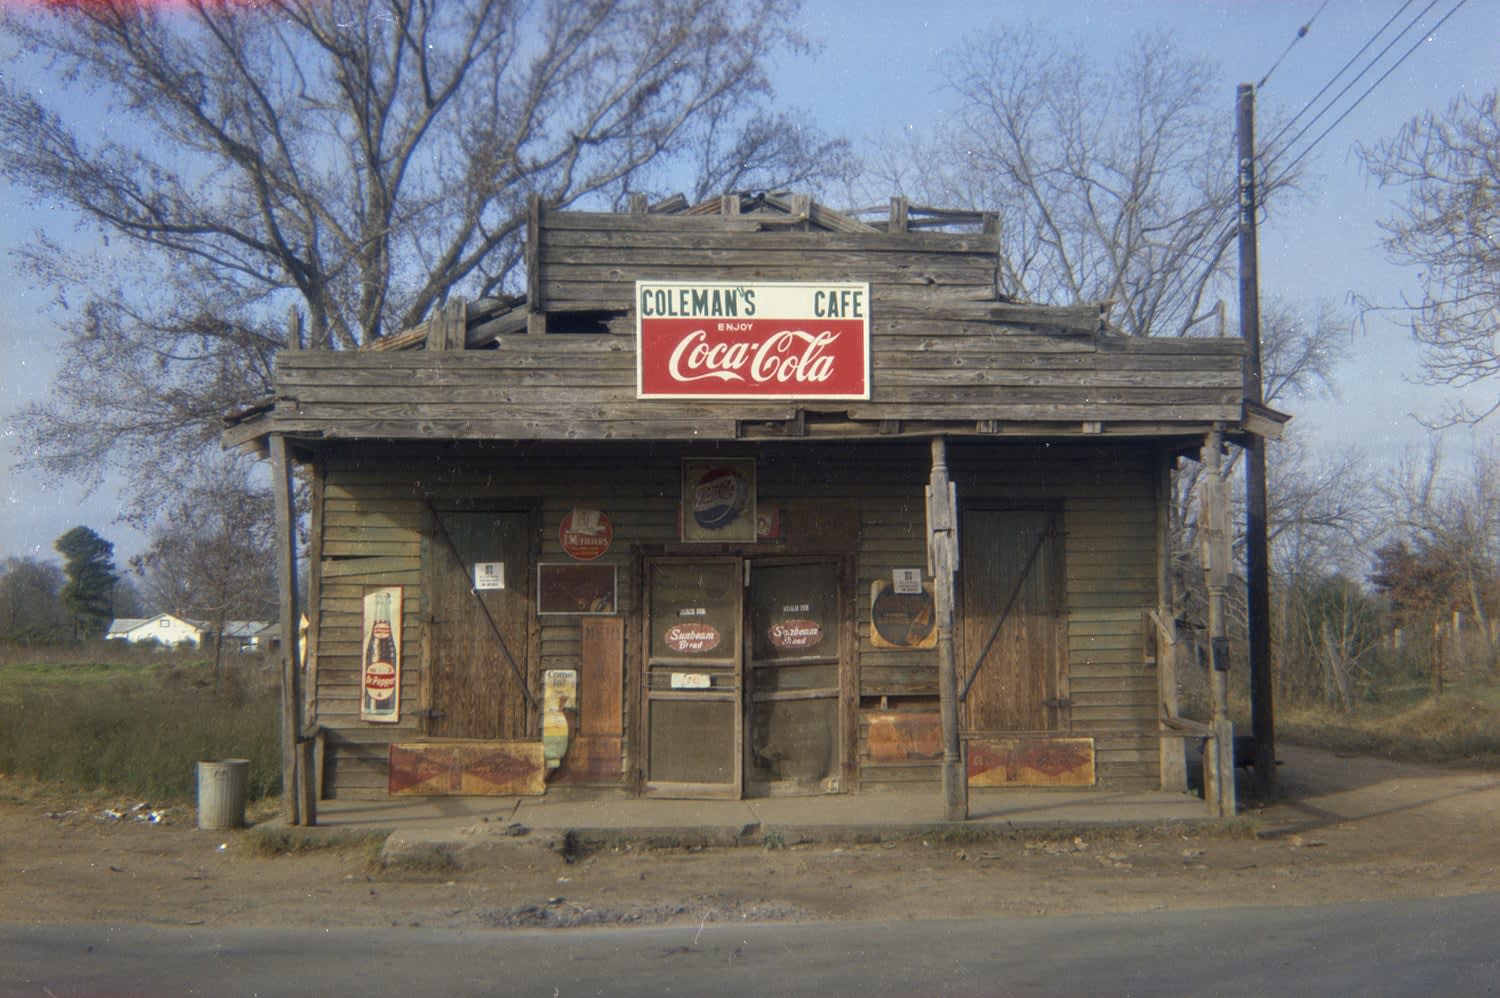 William Christenberry, an unlikely icon of Southern photography